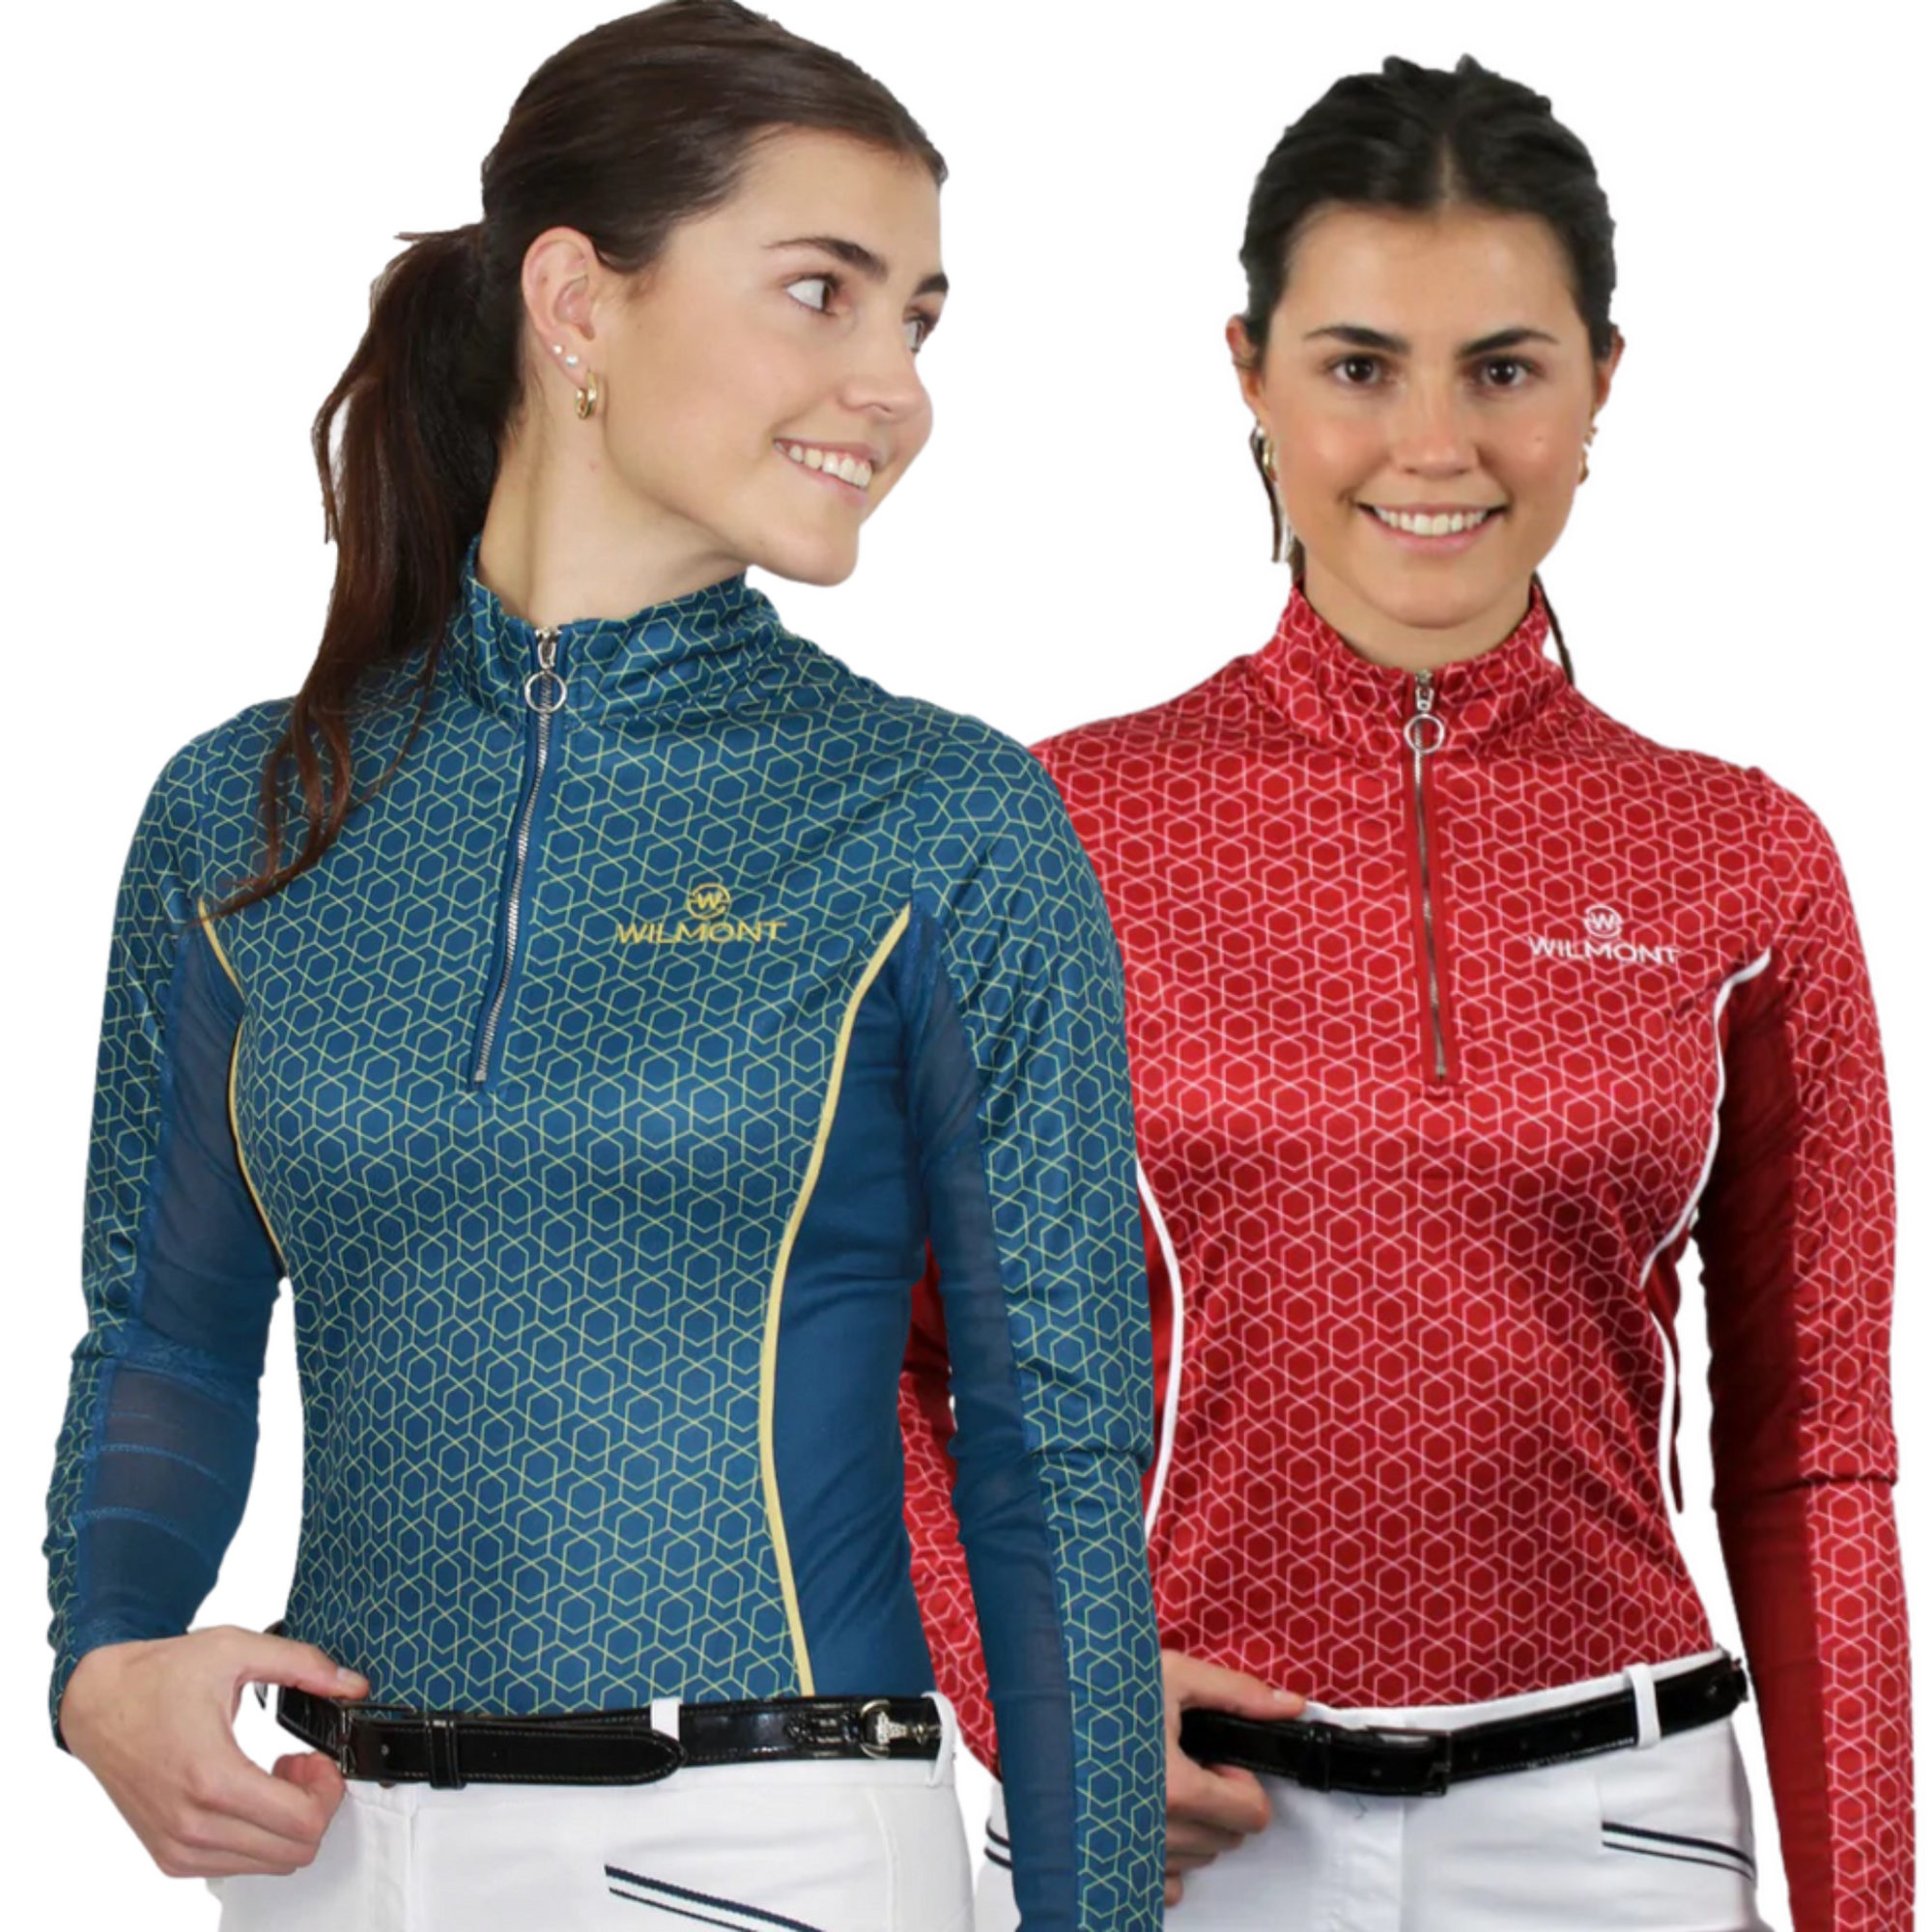 ladies wearing blue and red equestrian sunshirts